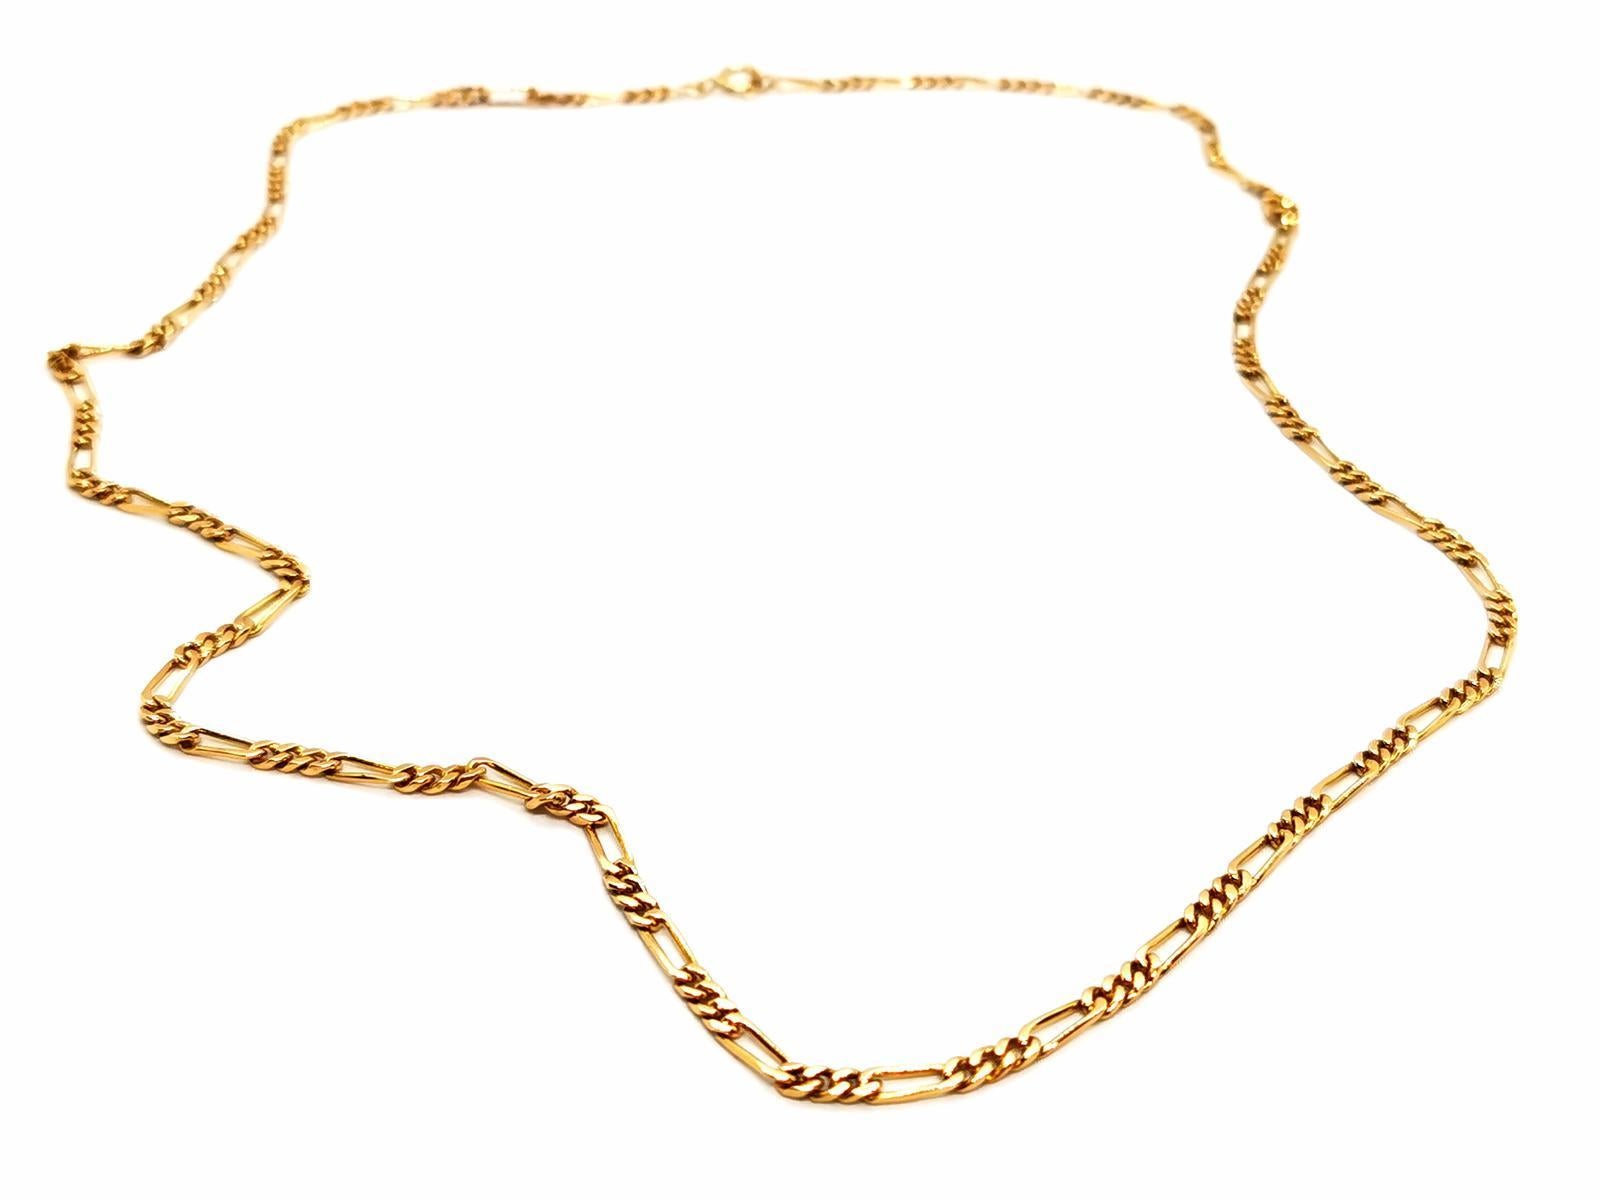 Necklace in yellow gold 750 thousandths (18 carats). alternating mesh. length: 62.5 cm. width: 0.28 cm. total weight: 18.71 g. Owl hallmark. excellent condition.
